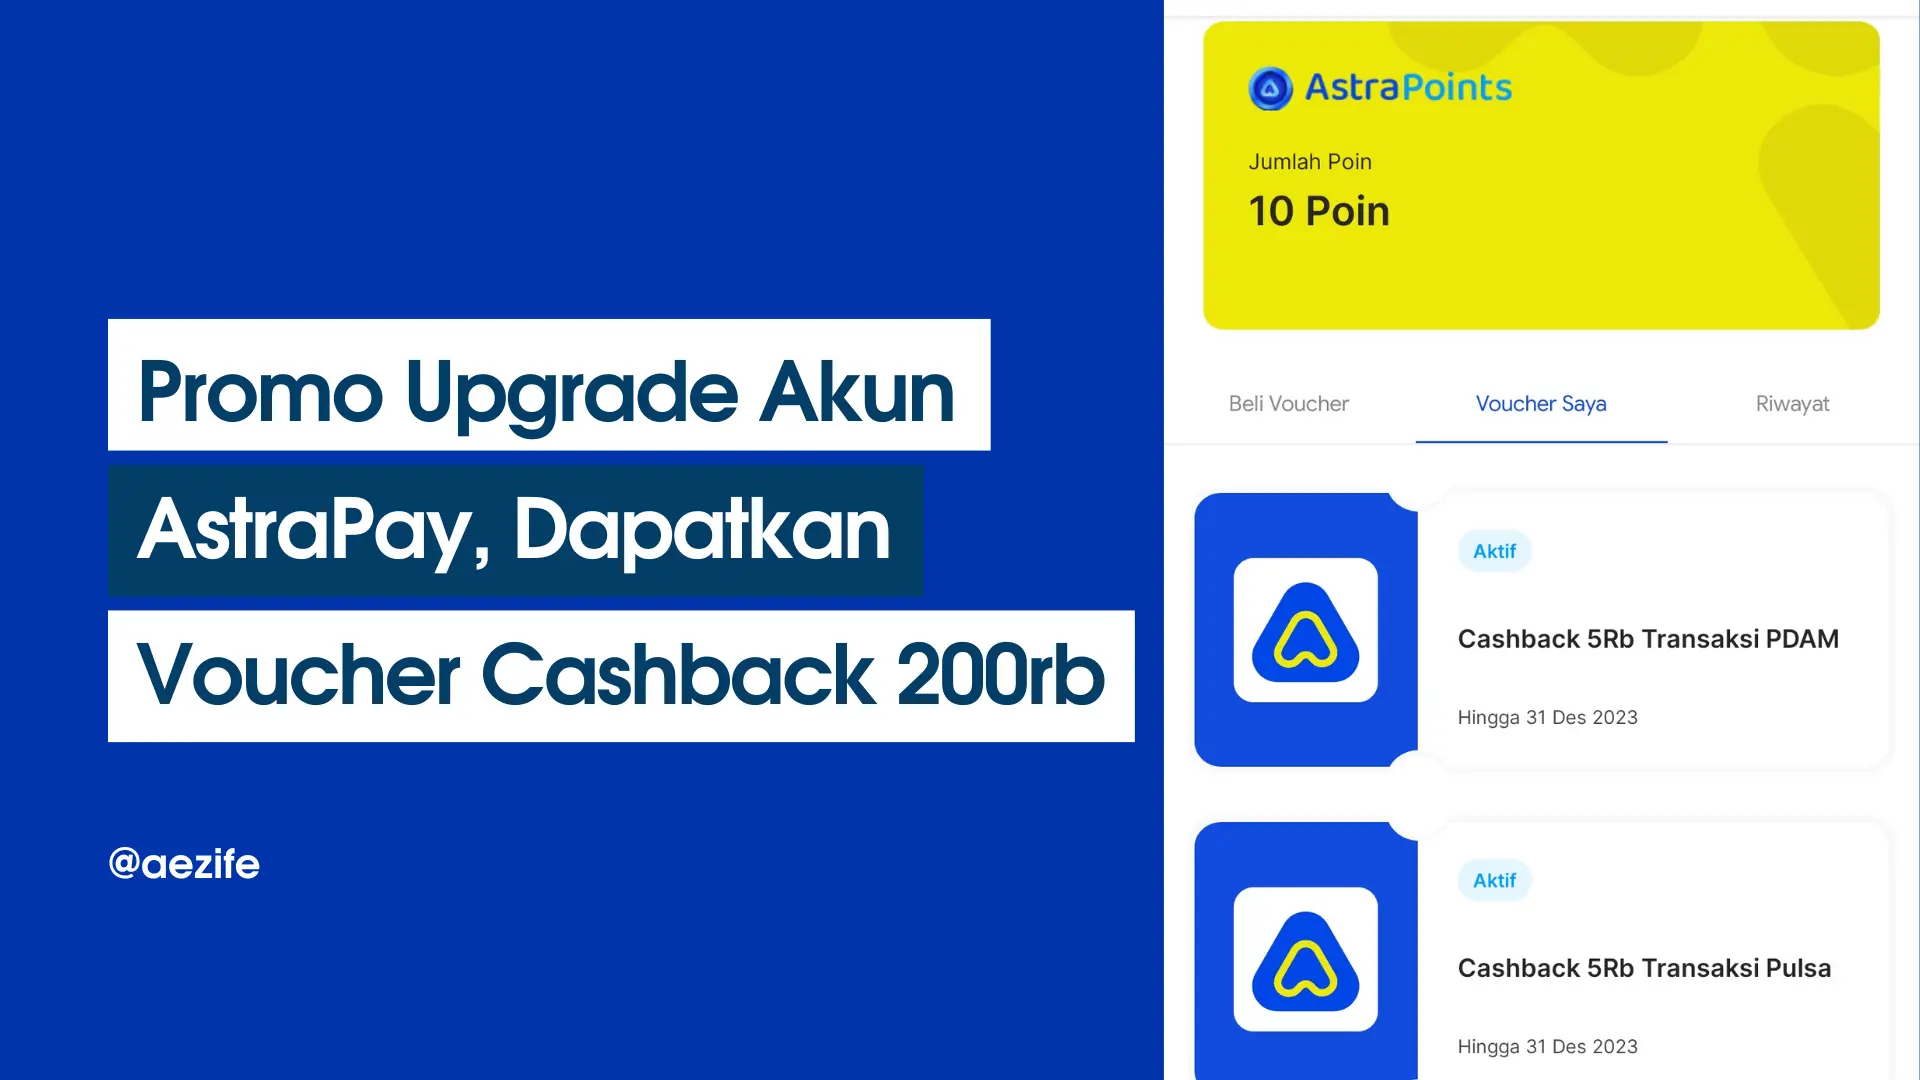 Upgrade Akun AstraPay, Dapatkan Voucher Cashback 200rb! (cover by @aezife)